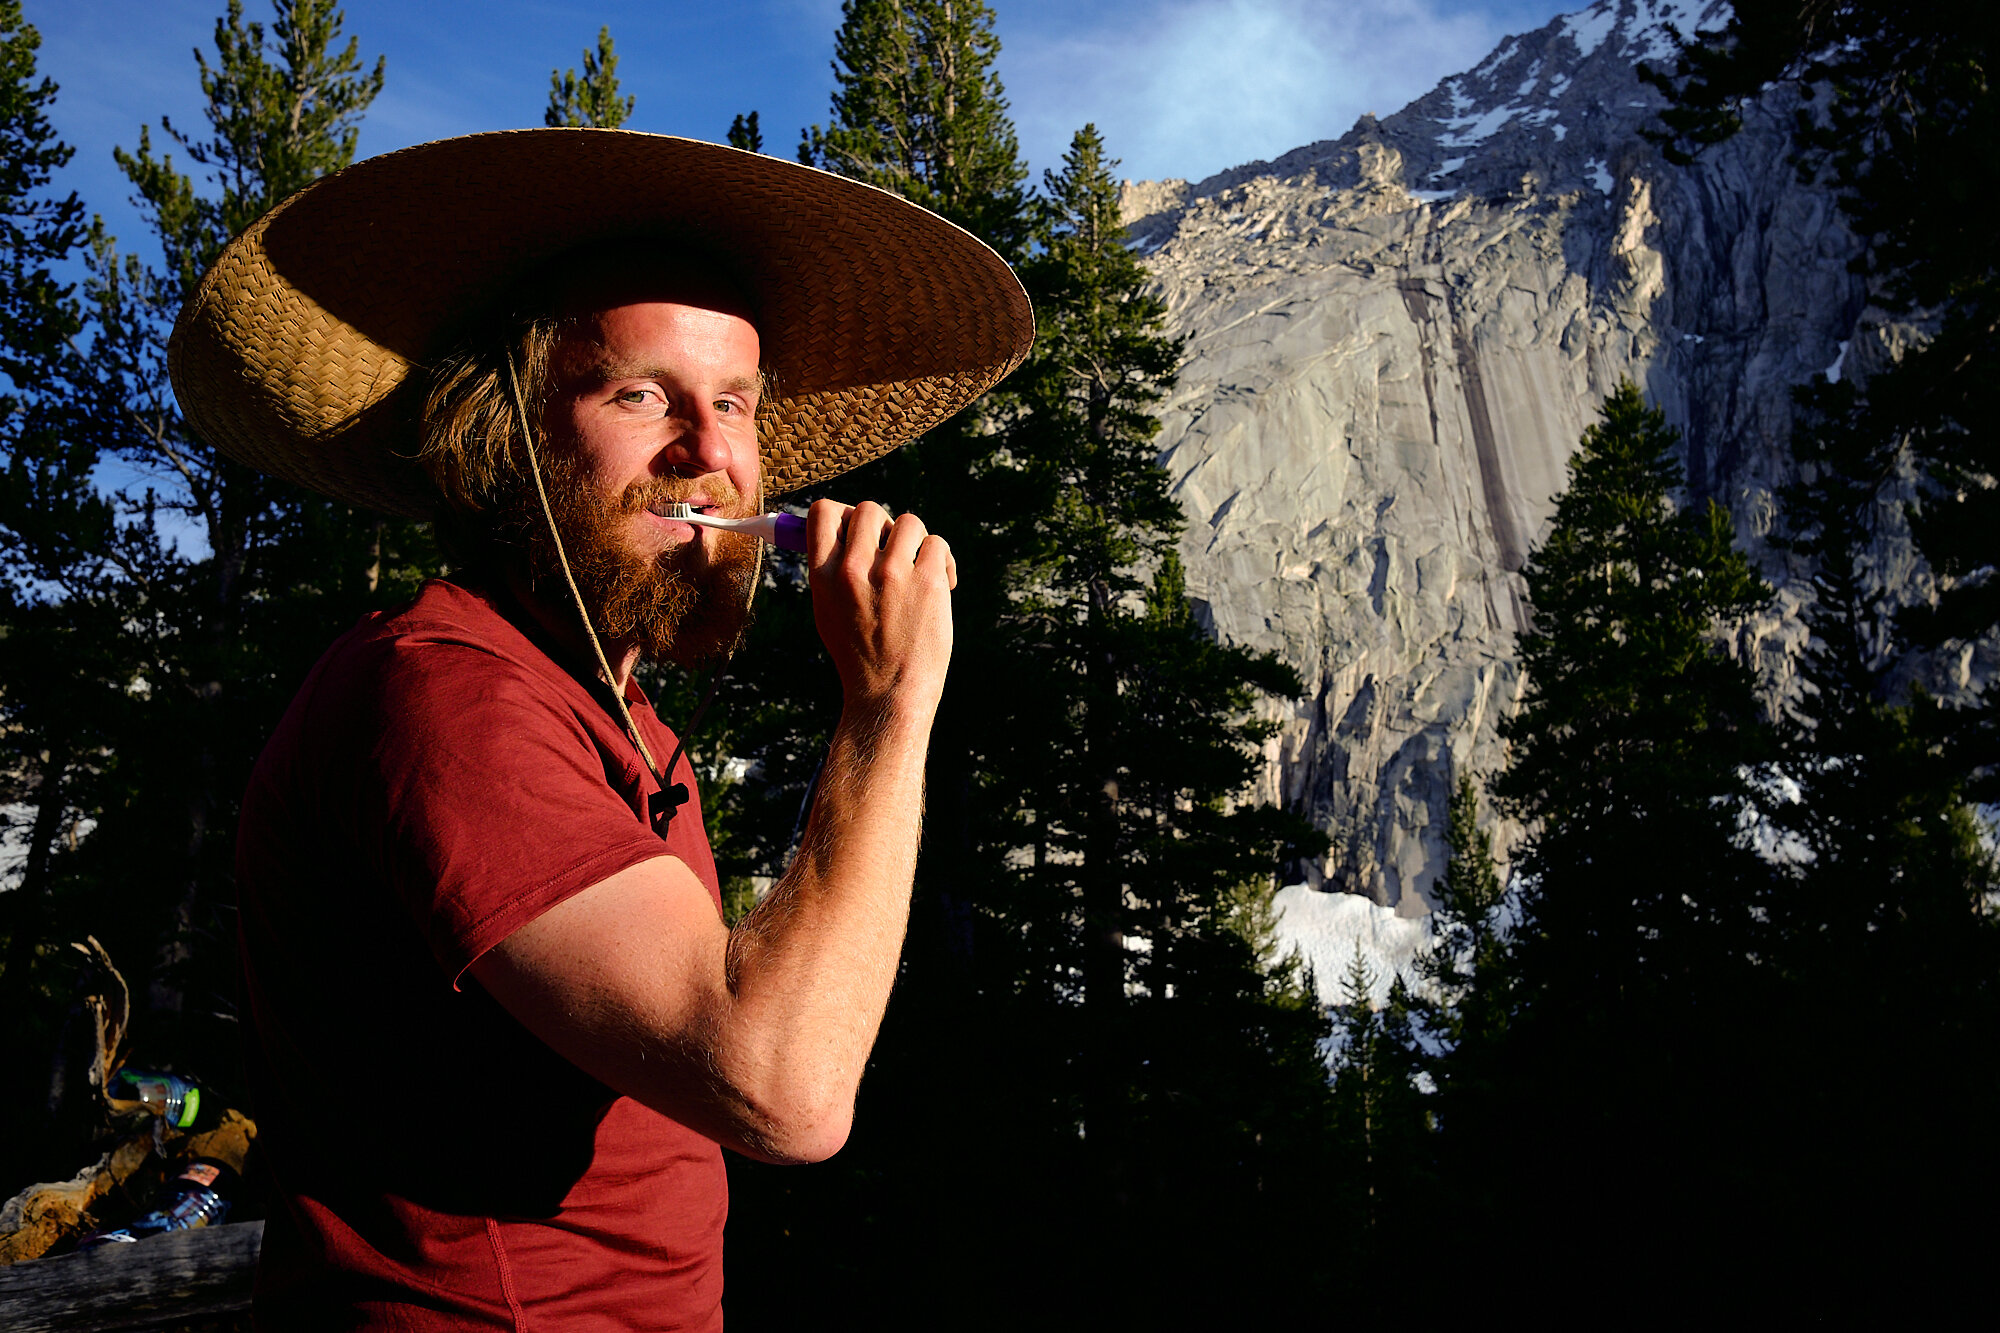  Lebowski takes care of some oral hygene in Kings Canyon National Park. | 6/27/19 Mile 786.1, 9,912' 